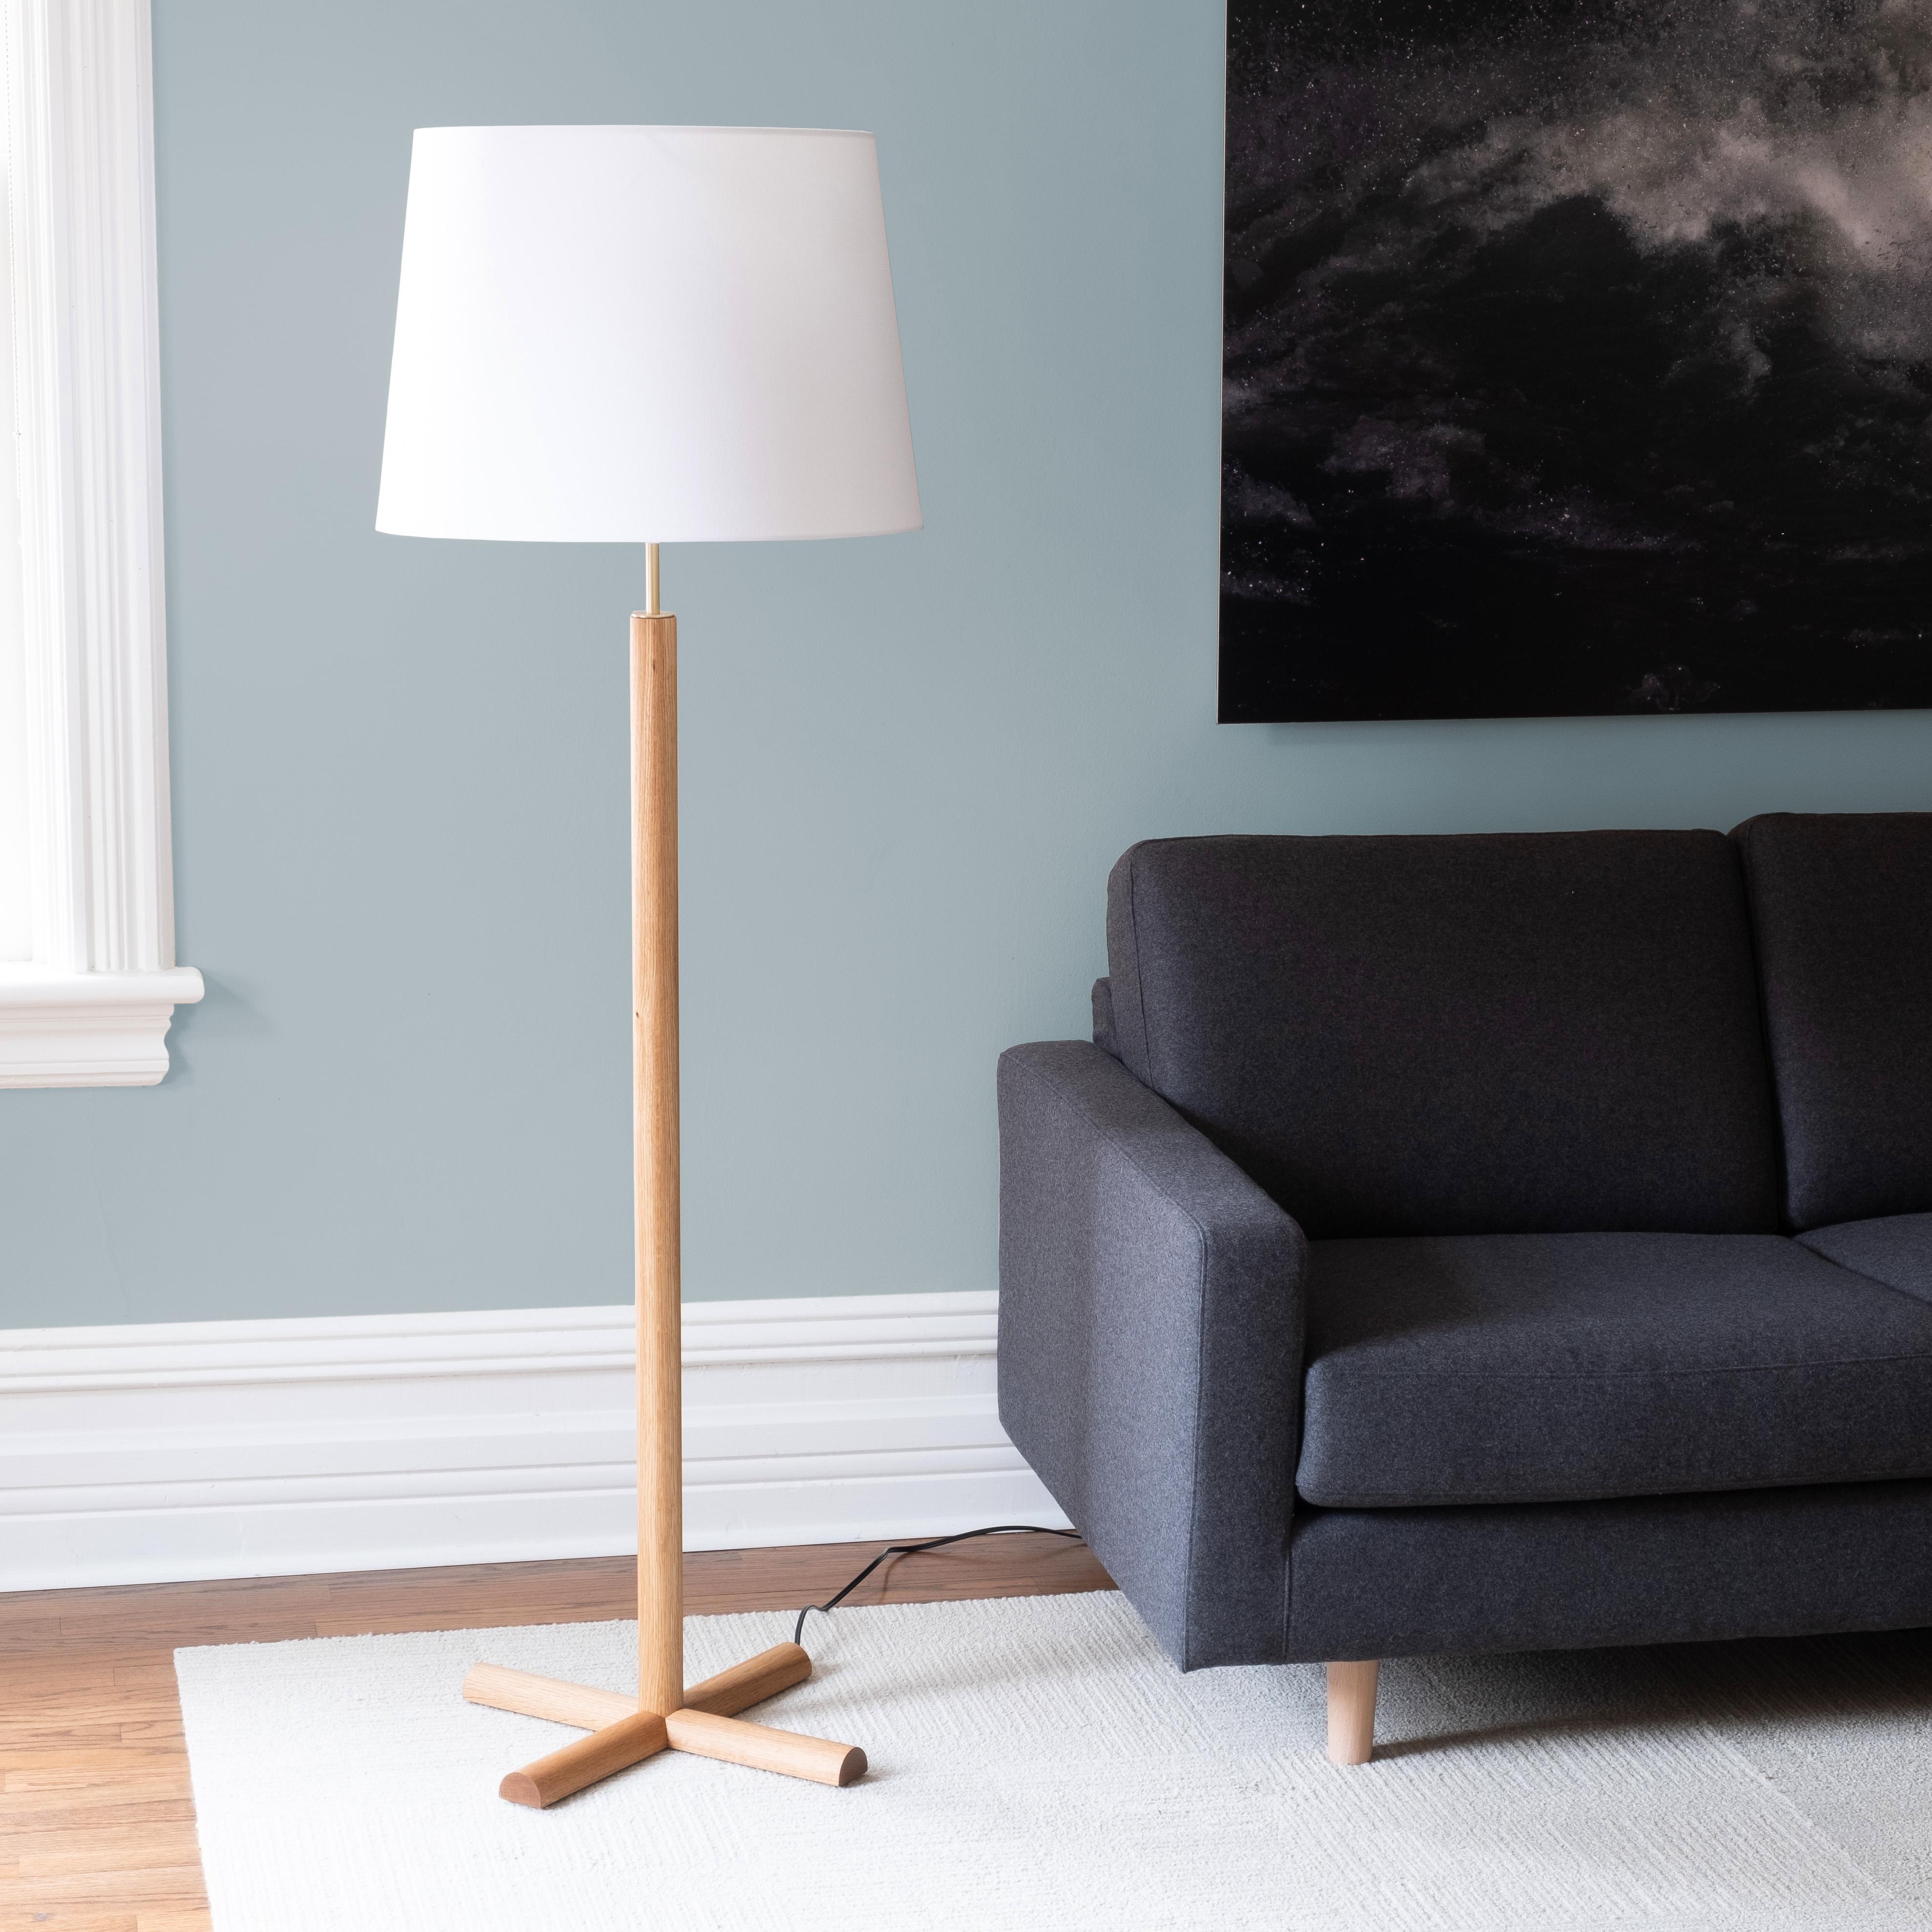 The Crux floor lamp combines minimalist forms, top-quality materials, and careful details.

The generous conical shade is supported by a clean column of turned wood, with an exposed section of brass hardware adding an elegant accent between the wood